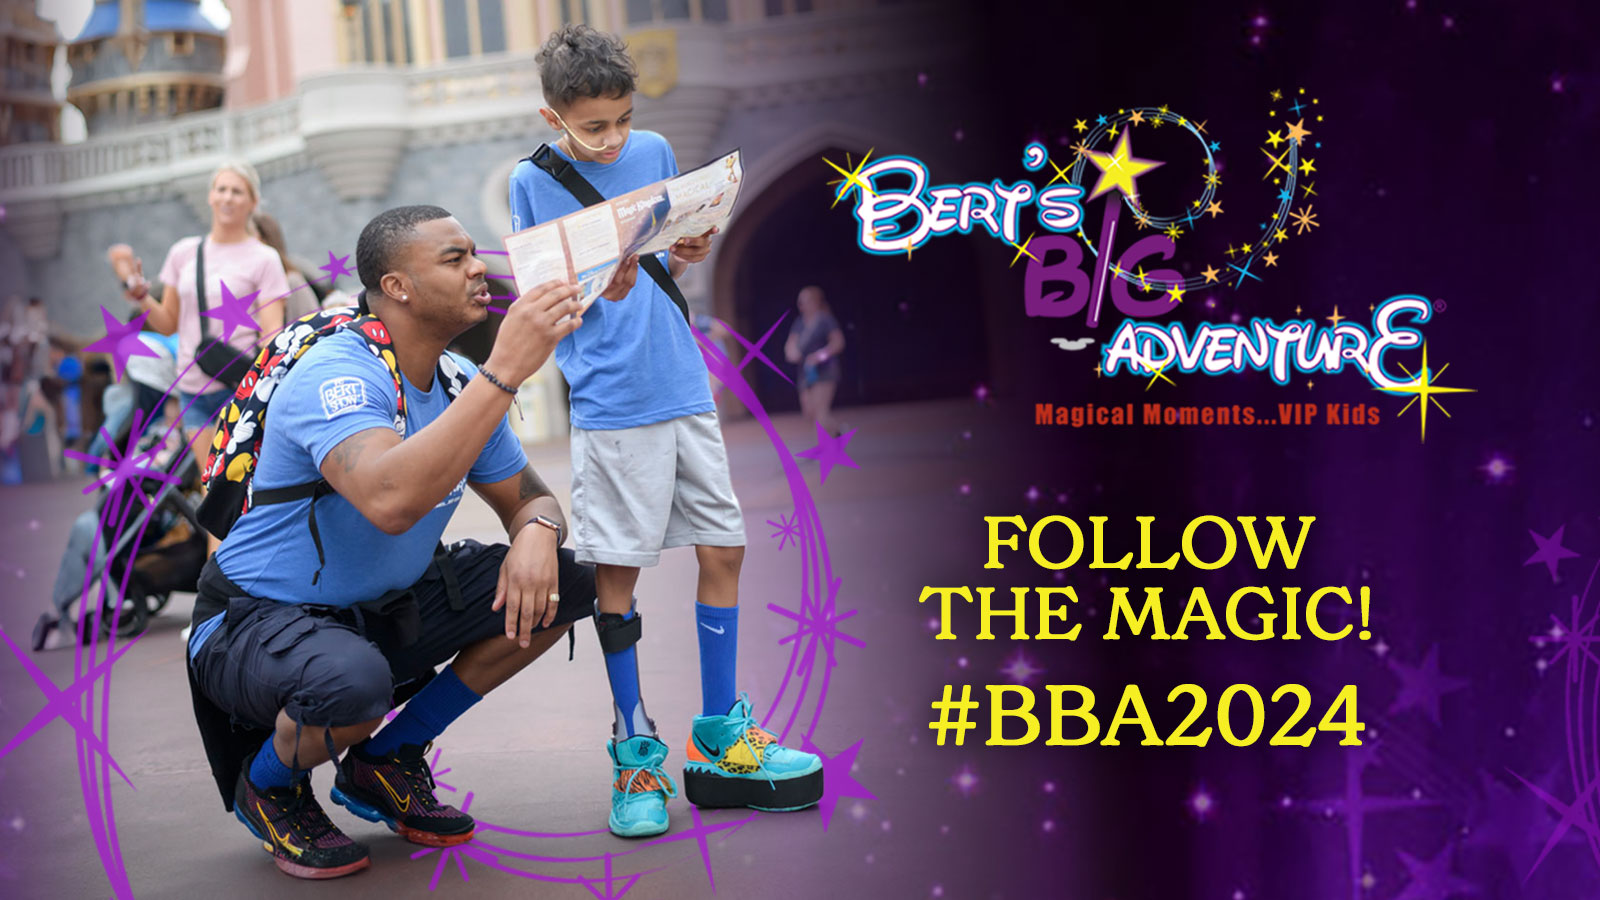 Bert's Big Adventure on X: Our trip kicks off THIS Wednesday! We'd be  honored if you'd follow the magic of #BBA2024! Here's how: Join on  Facebook:  Join on Instagram:   Listen